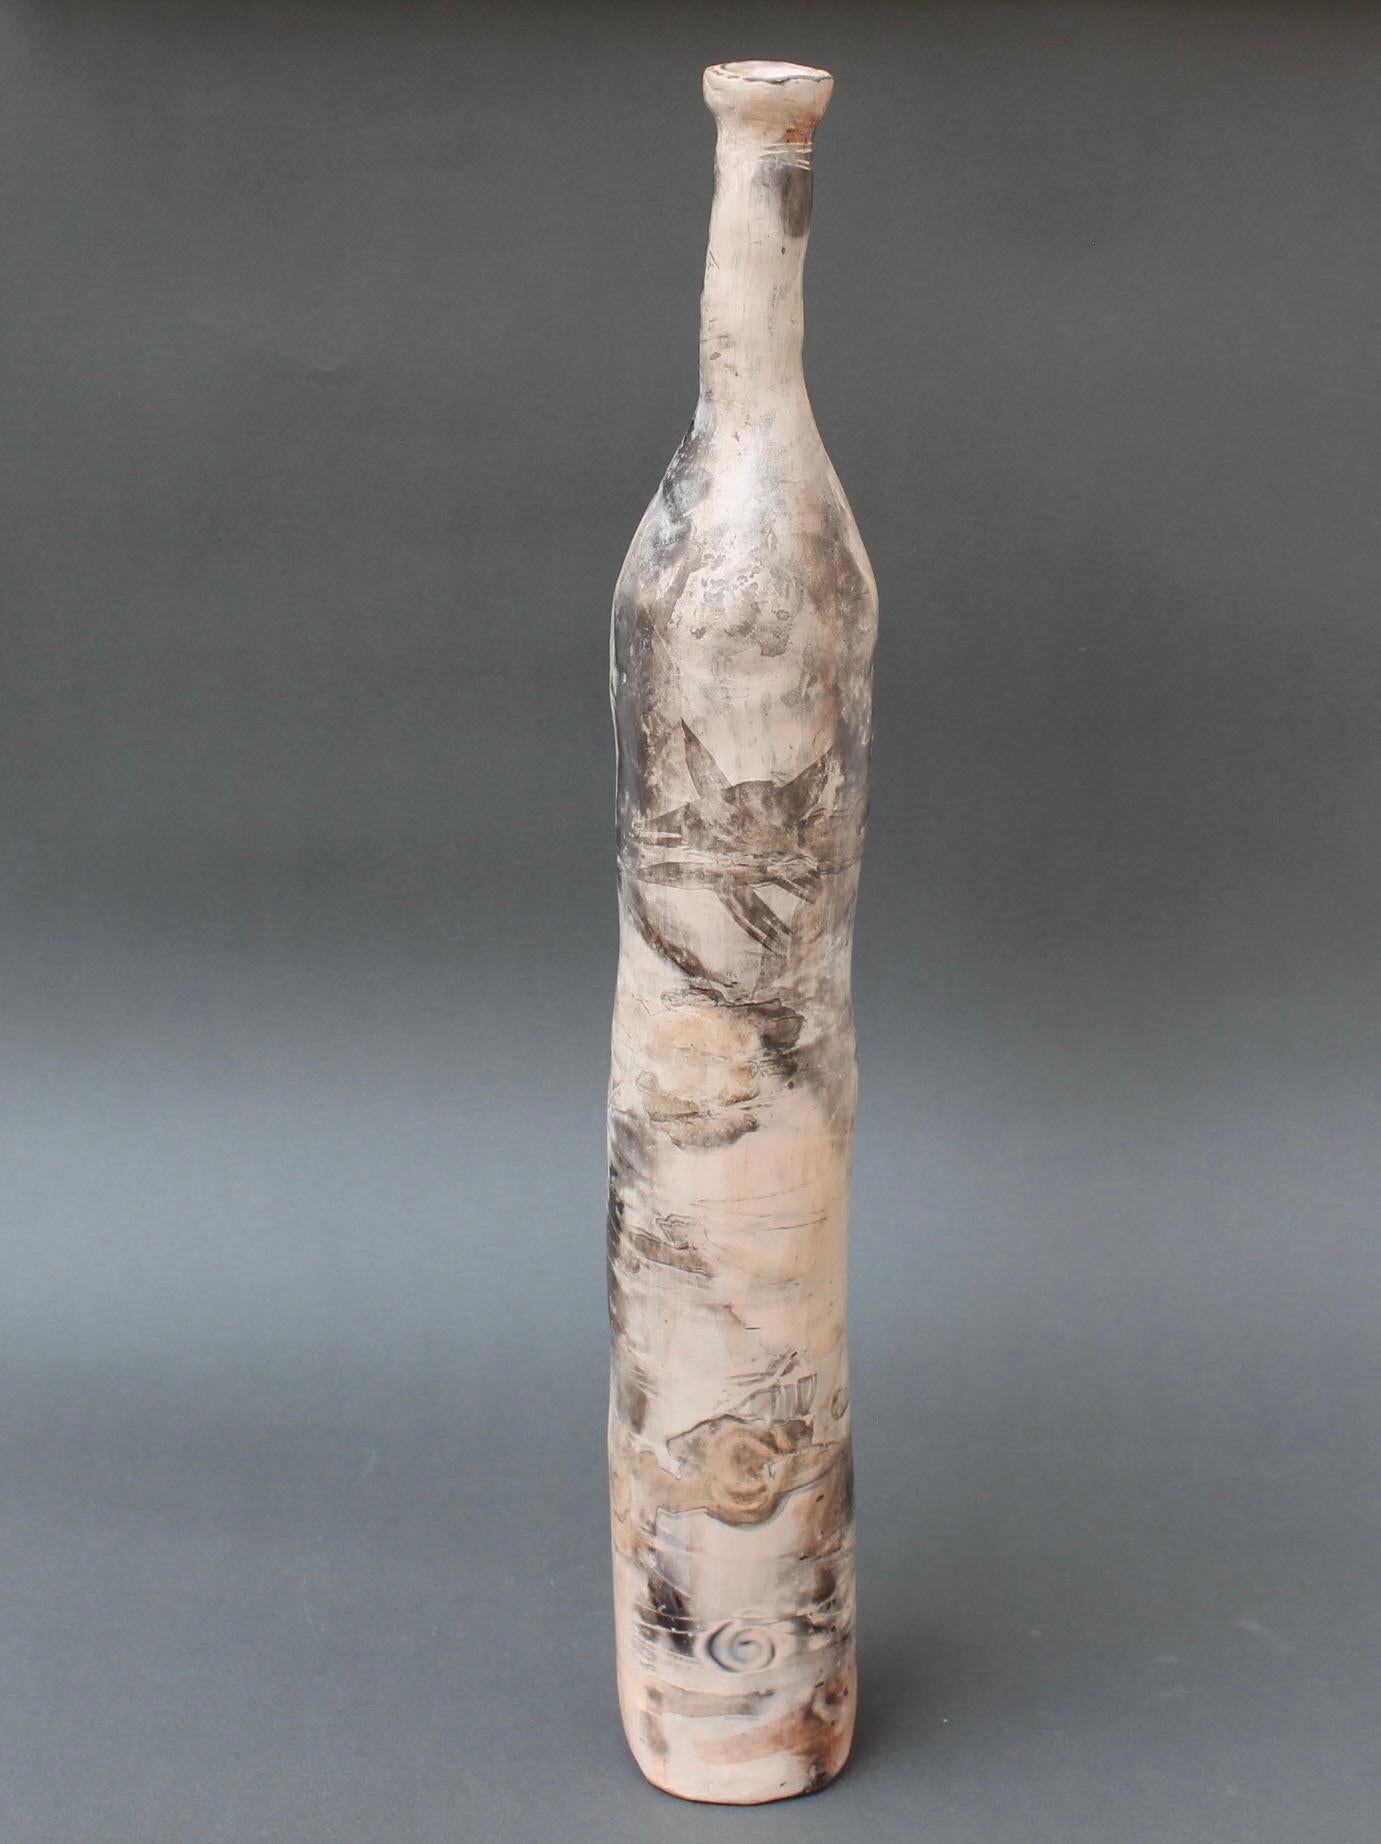 Vintage French Decorative Ceramic Elongated Bottle (20th C) In Good Condition For Sale In London, GB